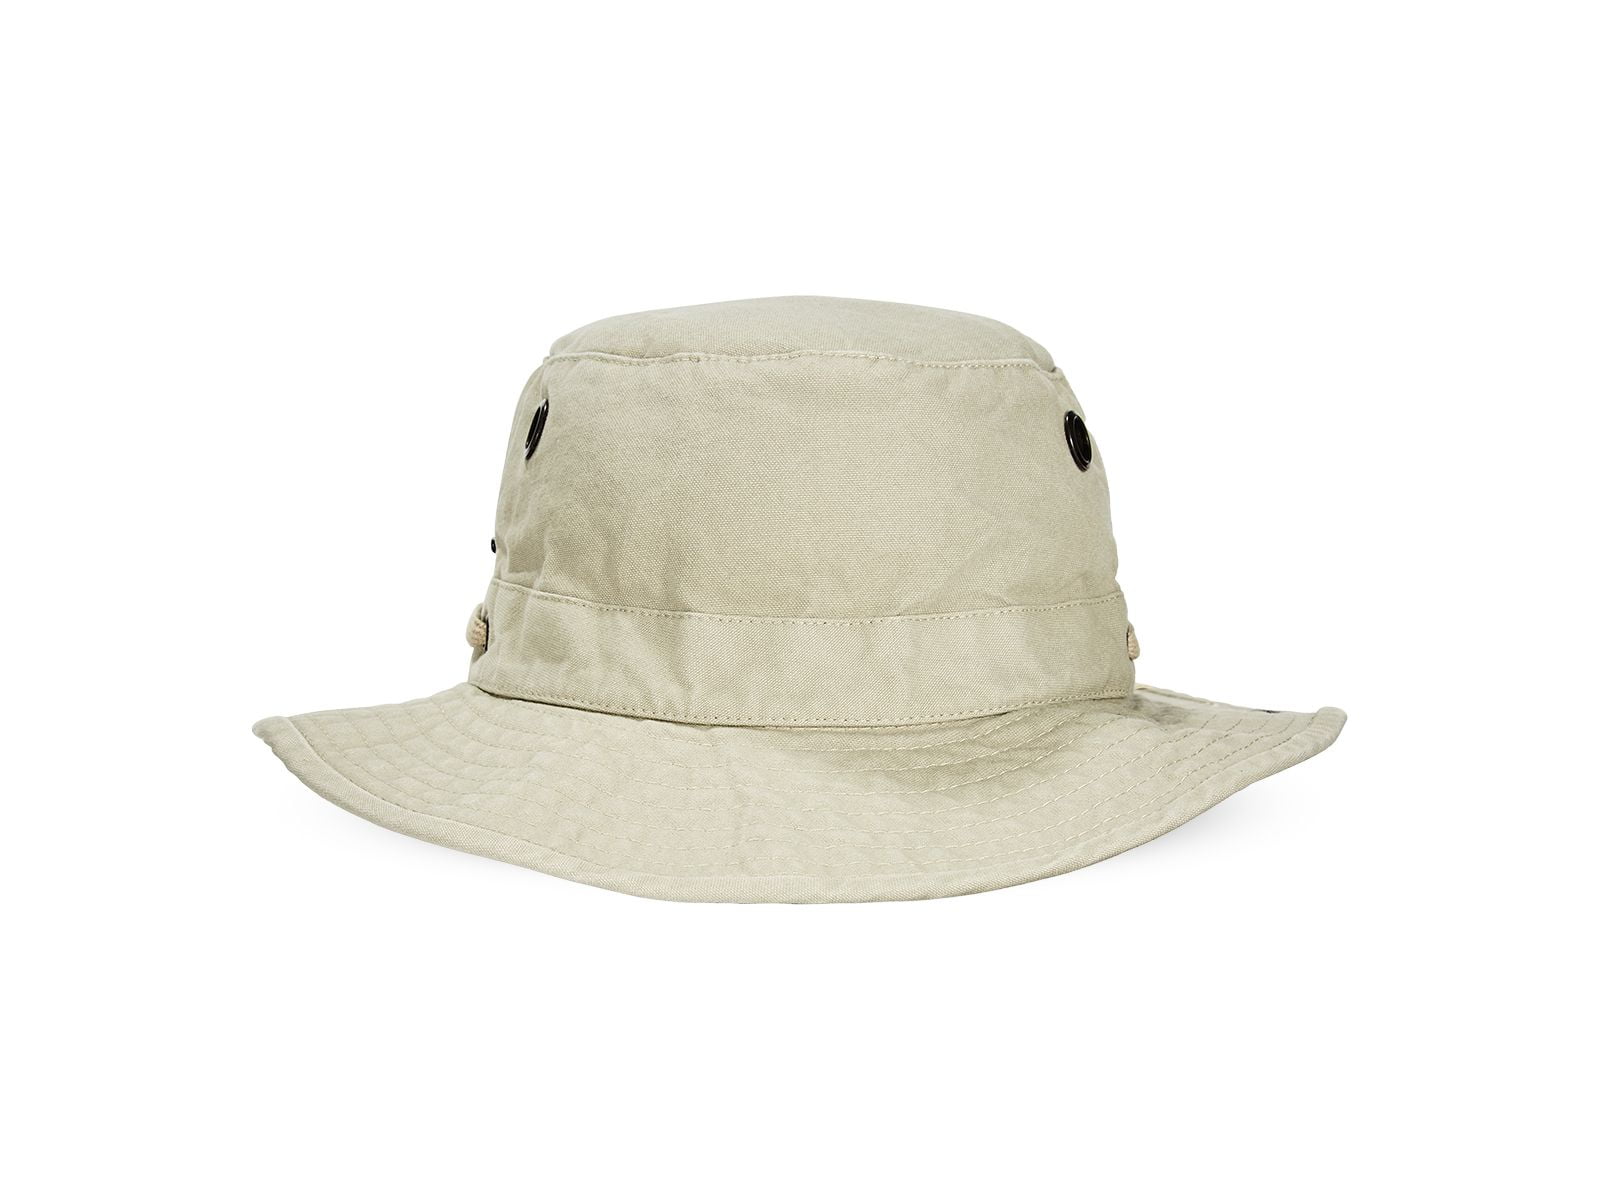 Tilley T3 The Wanderer Hat UPF 50 Sun Protection Guaranteed for Life